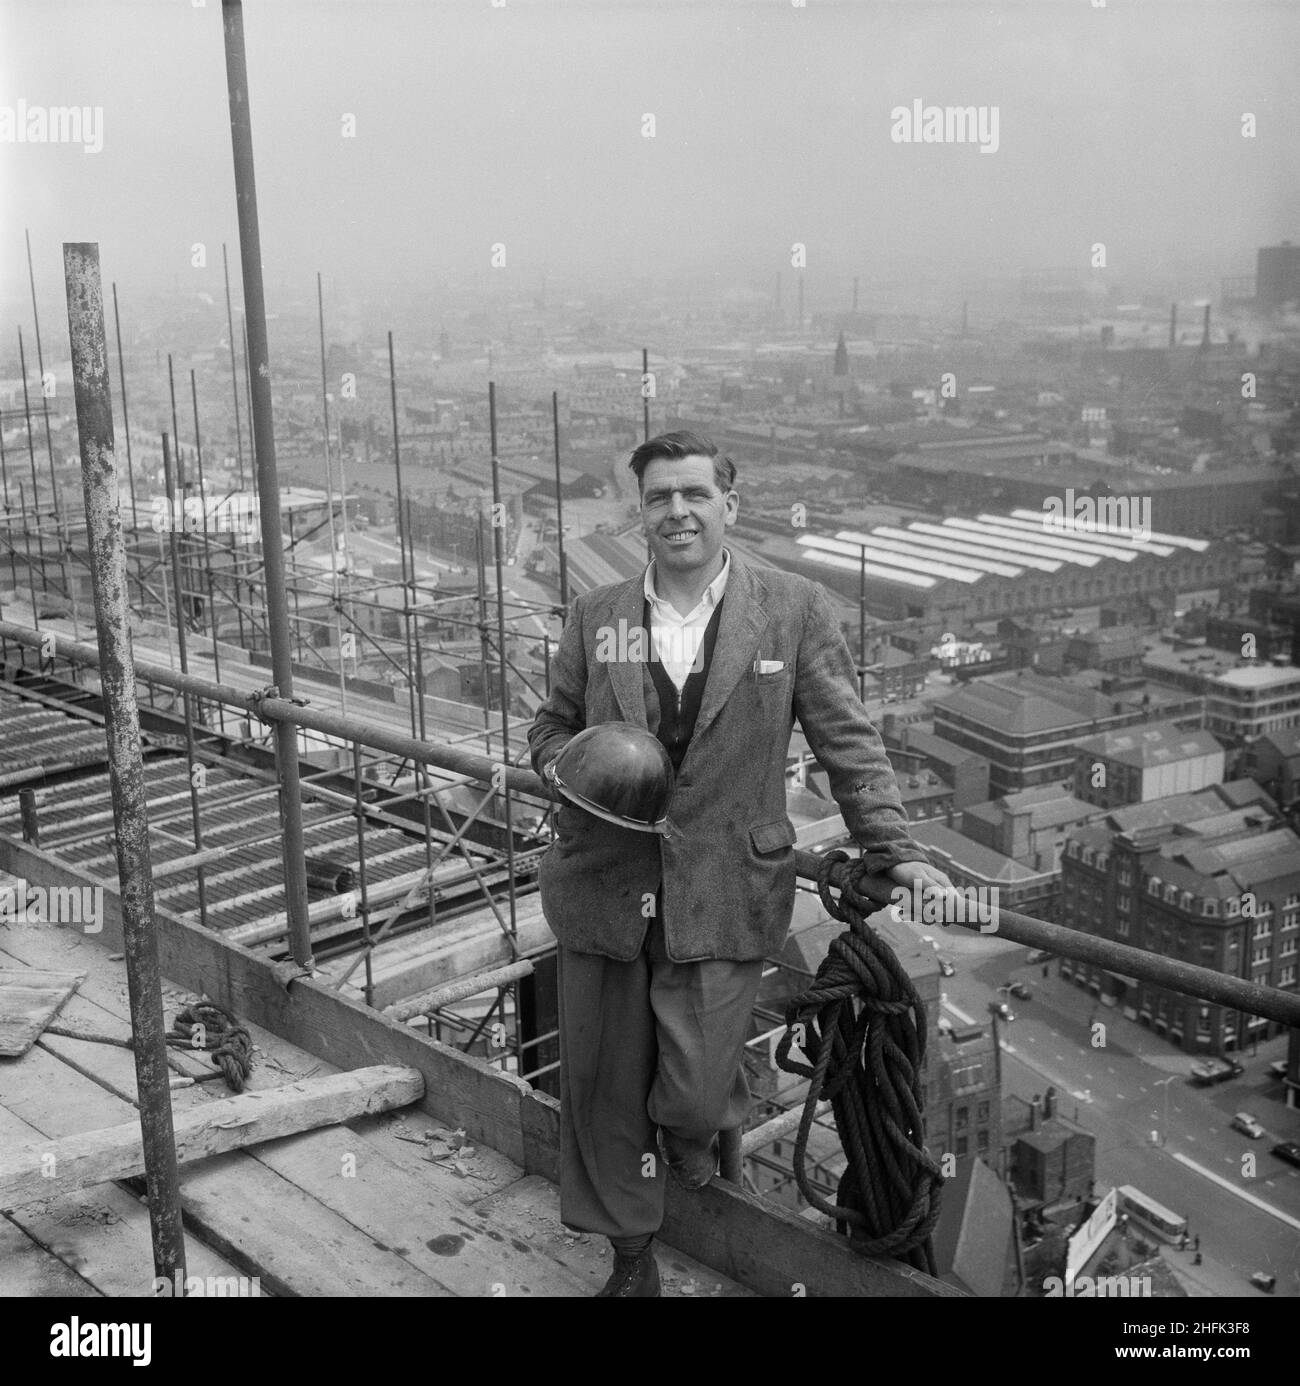 CIS Building, Cooperative Insurance Society Tower, Miller Street, Manchester, 07/06/1961. Bill Whelan, a Weitz G.60 tower crane driver, posed on the construction site of the Co-operative Insurance Society (CIS) Building in front of a view across Manchester. In 1959, the Laing Company began work on the construction of two office blocks for the Co-operative Society in Manchester. The Co-operative Insurance Society (CIS) tower was over 350ft high when completed in 1962, and was the tallest office block in the country at the time. On an adjacent site, a smaller 14-storey high office block for the Stock Photo